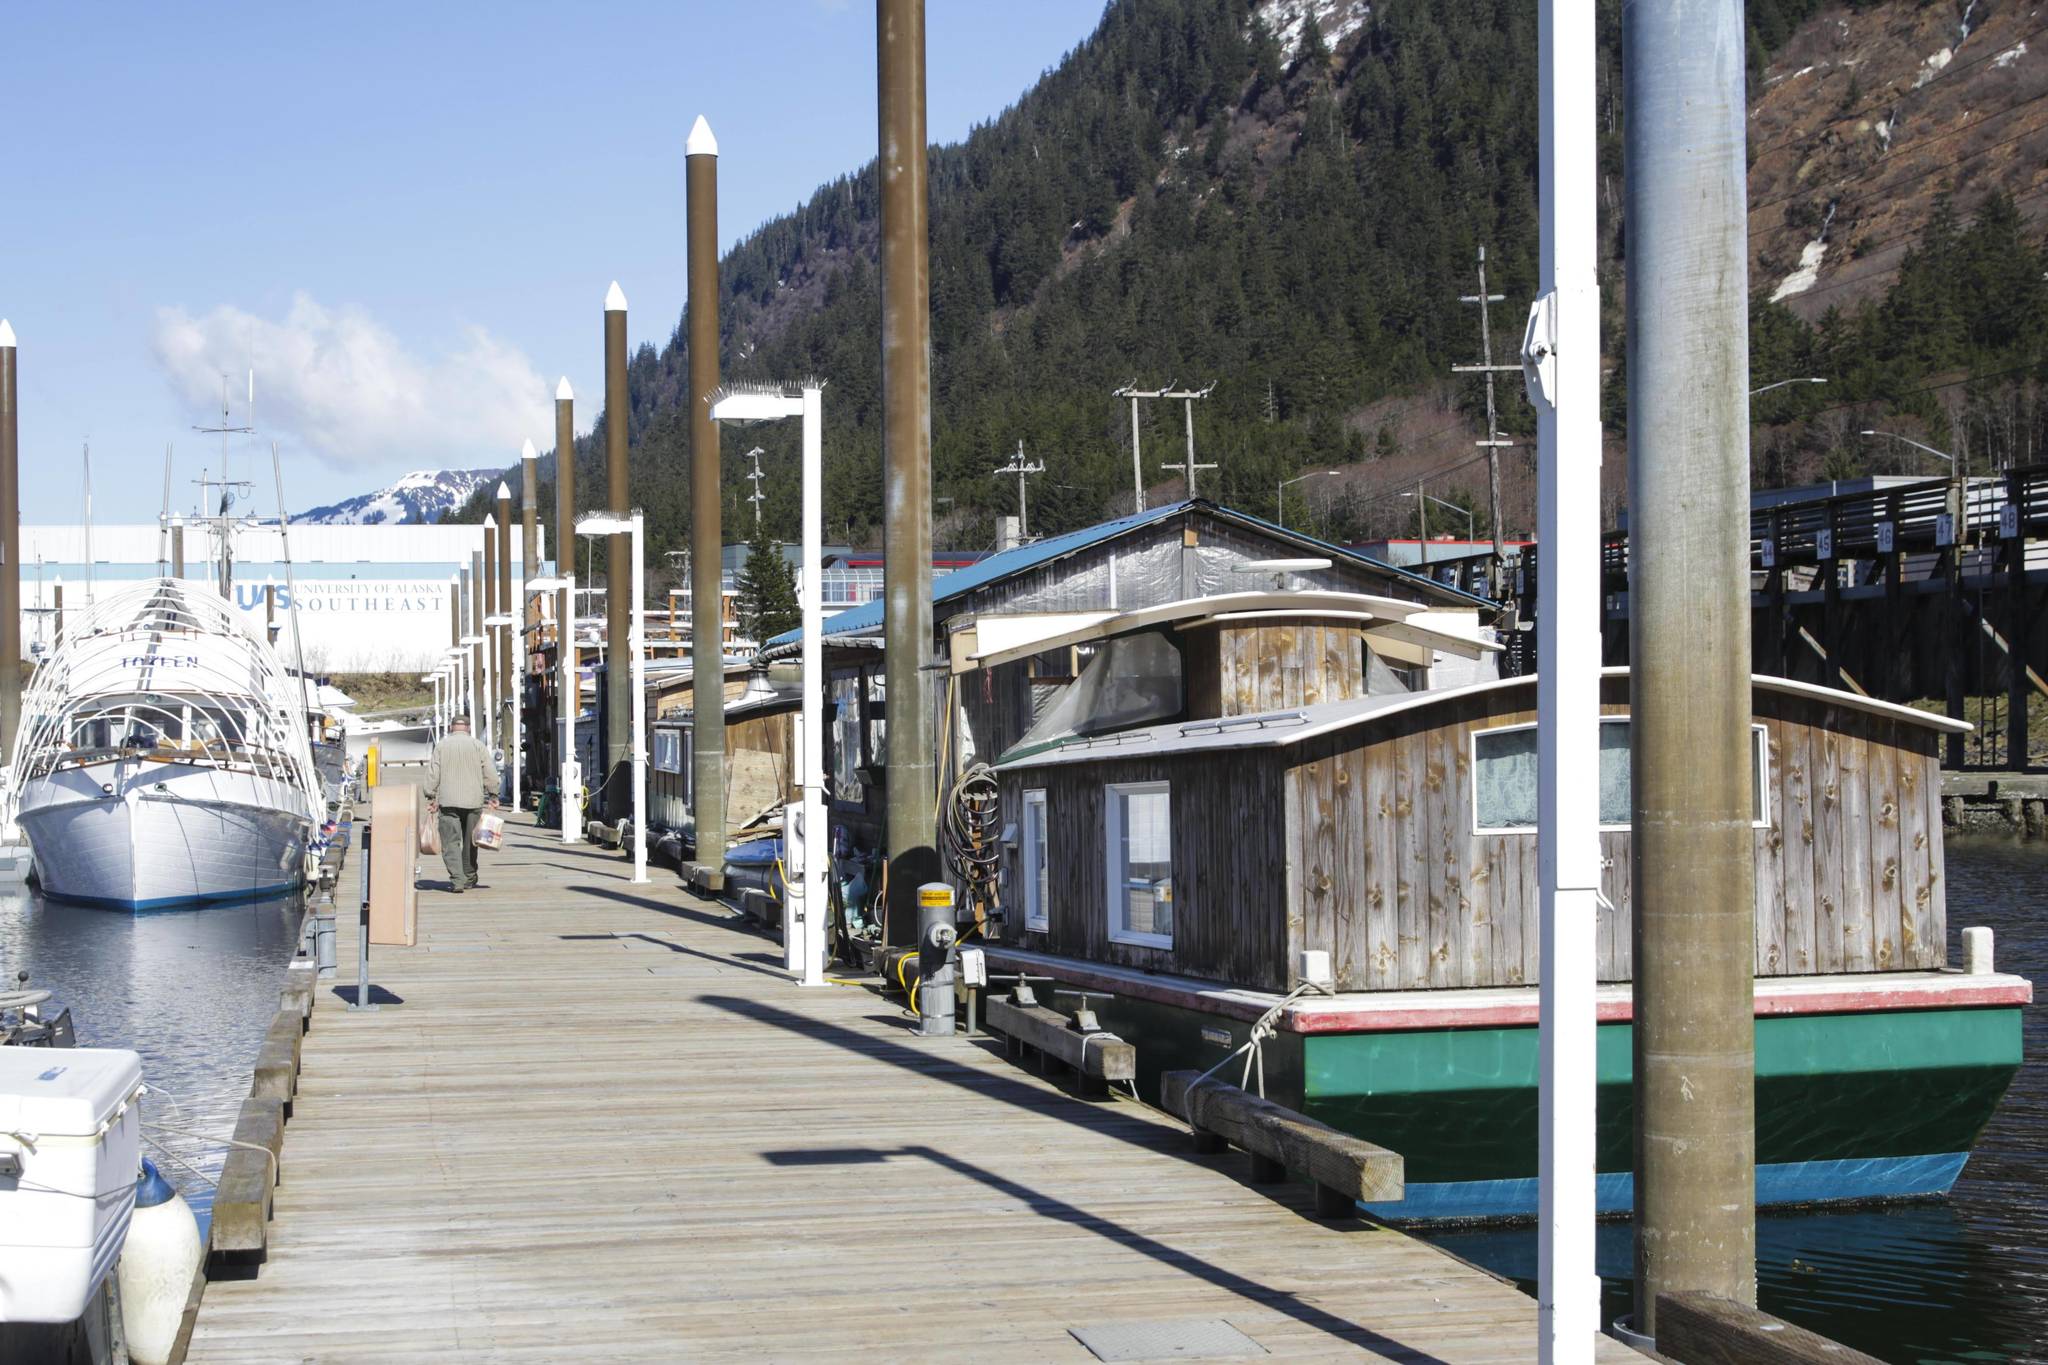 A proposal to the Docks and Harbors board to double residency fees for live-aboard residents of Juneau’s harbors have rankled many. (Michael S. Lockett / Juneau Empire)